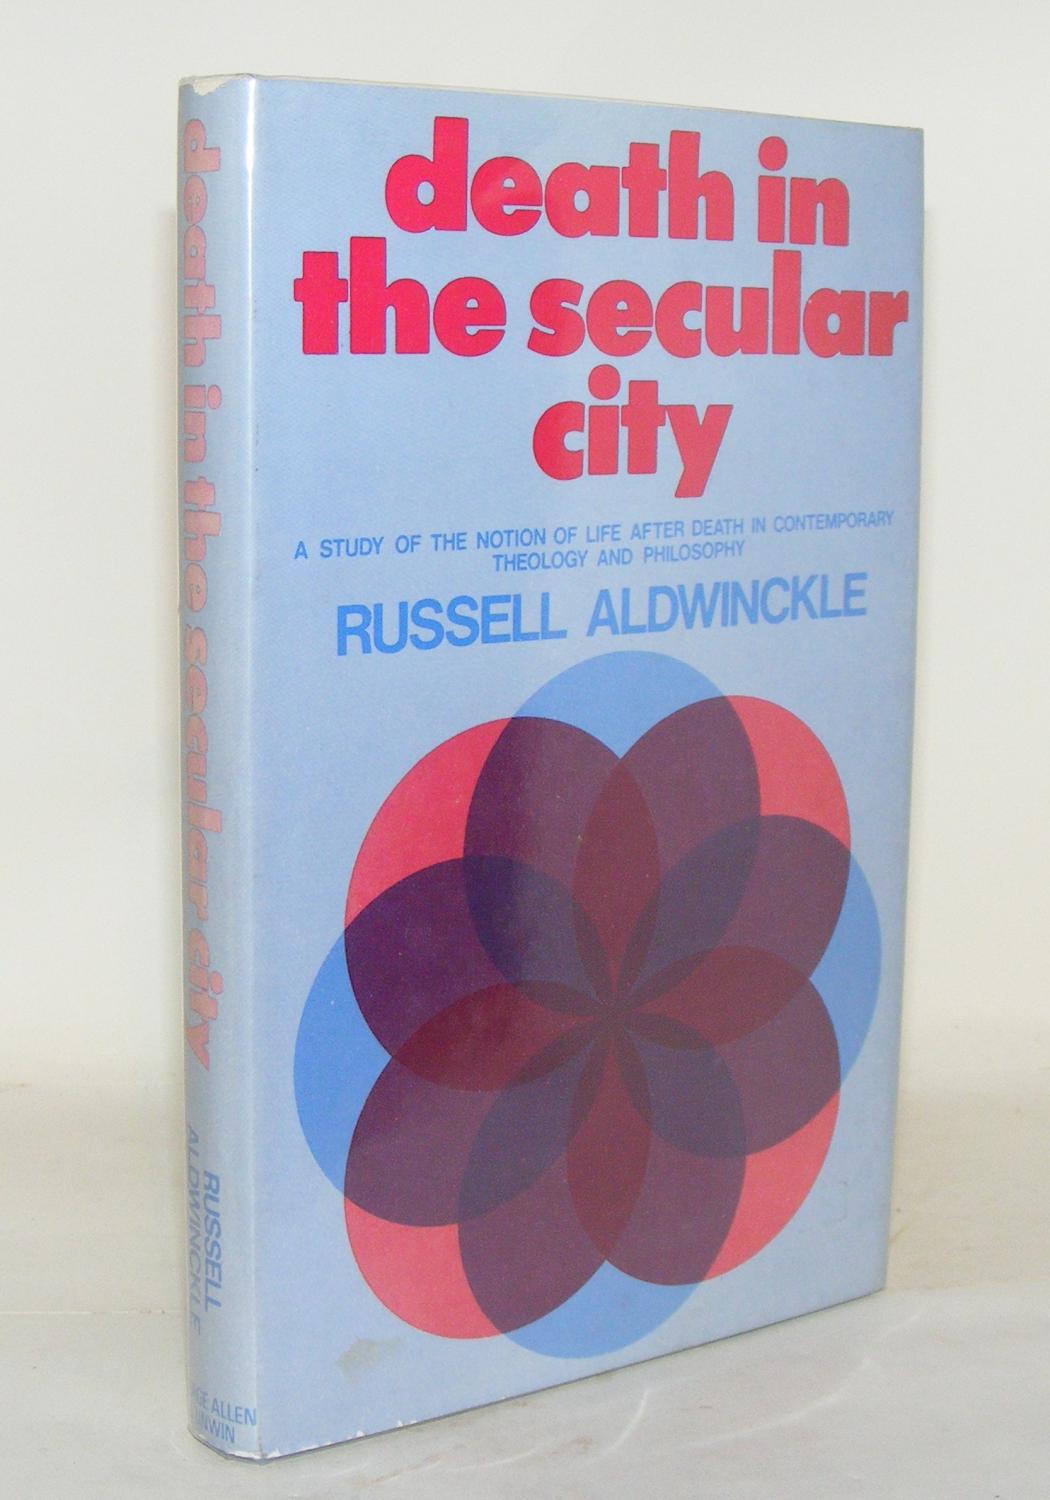 DEATH IN THE SECULAR CITY A Study of the Notion of Life After Death in Contemporary Theology and Philosophy - ALDWINCKLE Russell